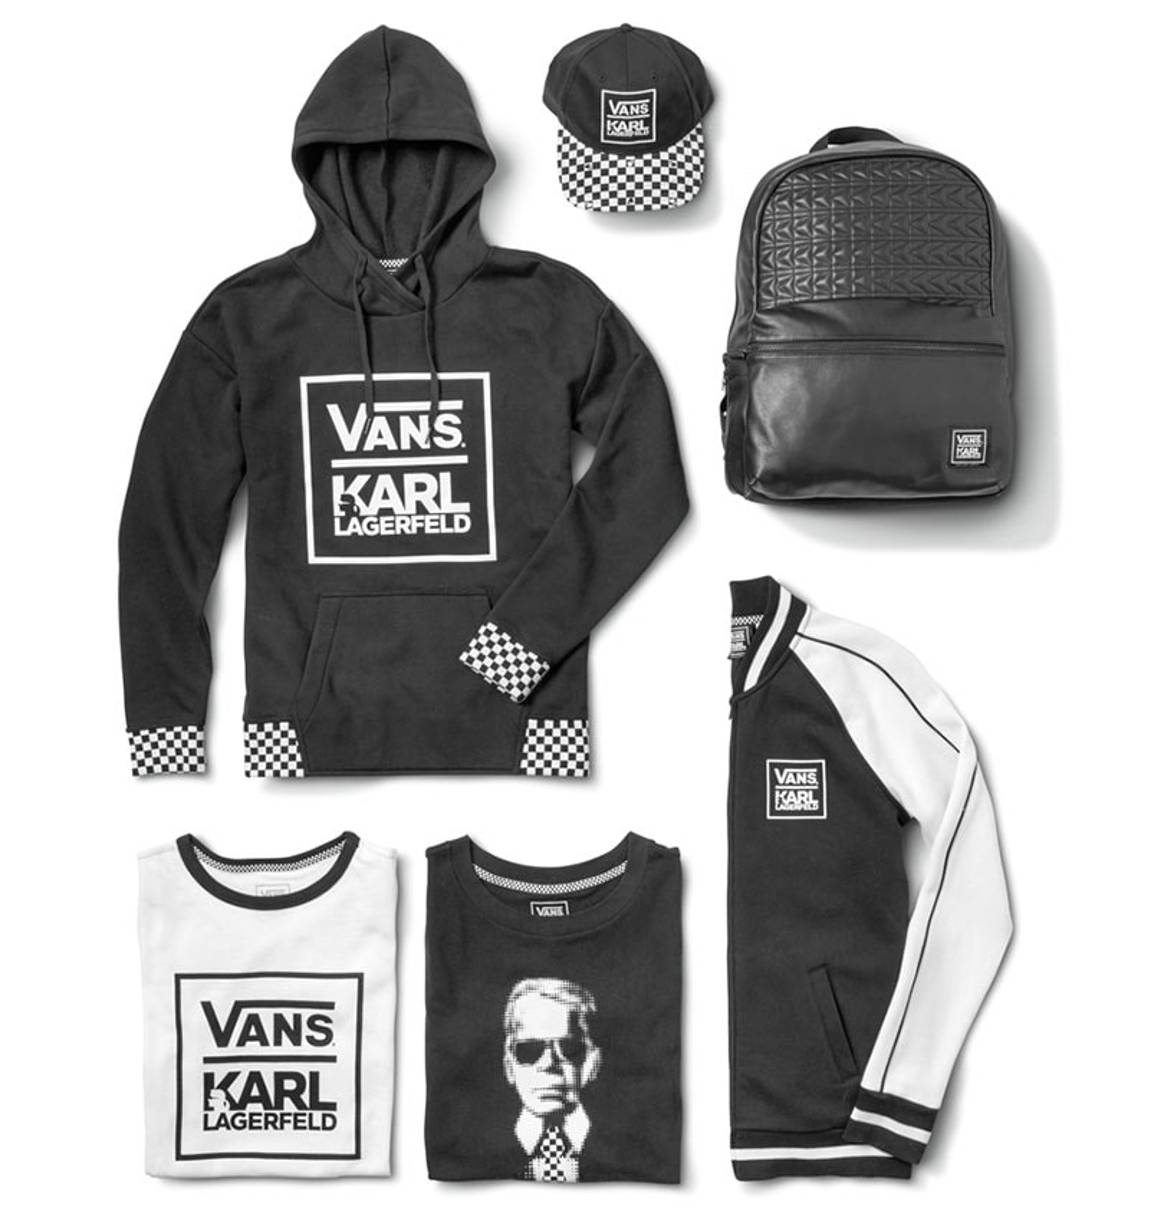 Vans collaborates with Karl Lagerfeld for Fall 2017